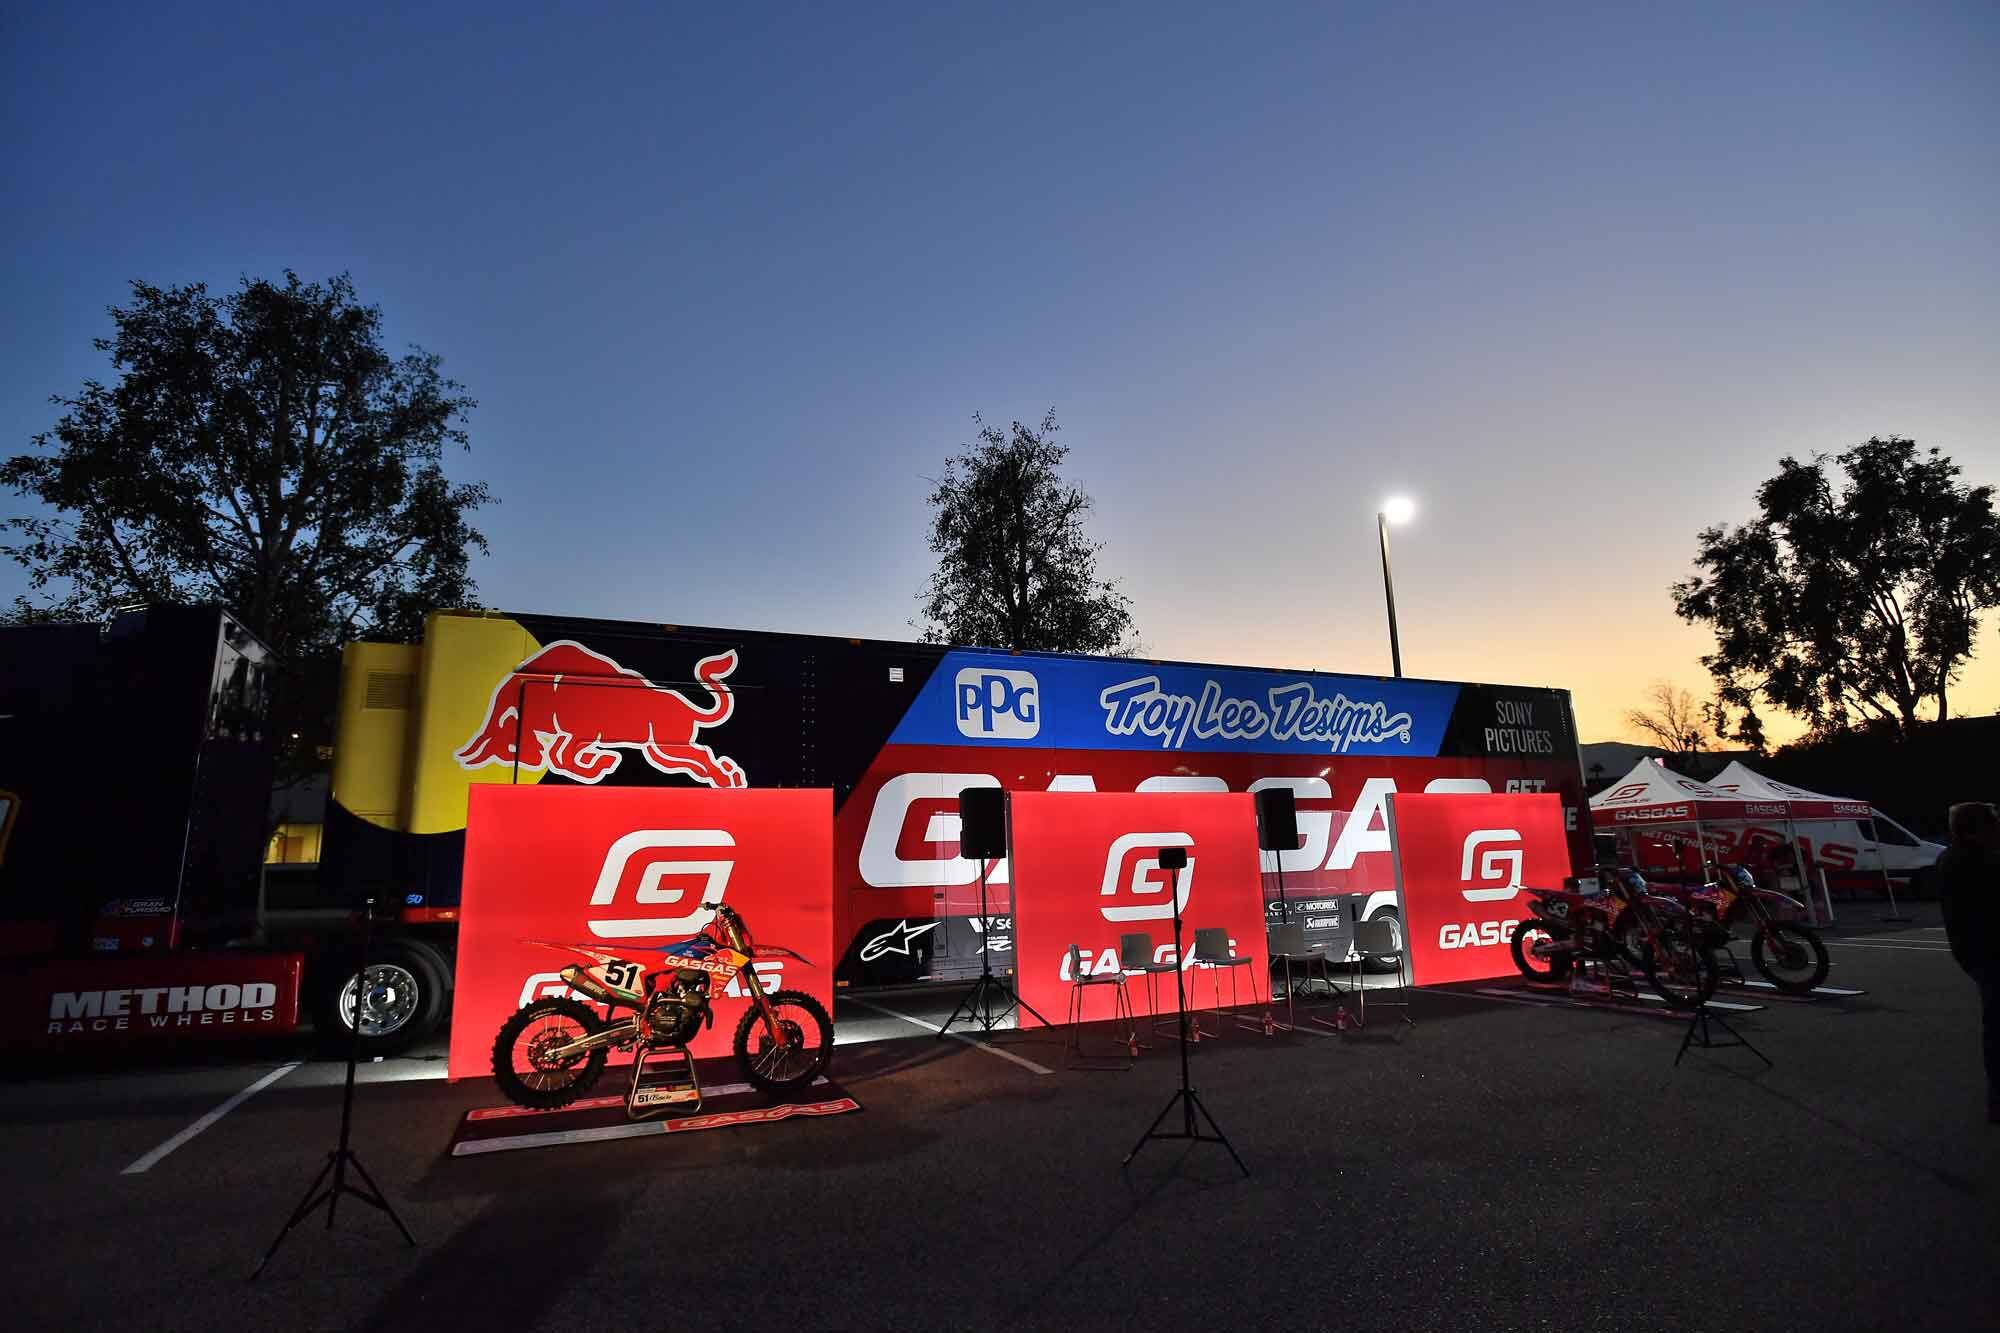 The Troy Lee Designs/Red Bull/GasGas Factory Racing rig will be unmistakable rolling down the road or set up at races. The team introduction was open to the public and quite a bit different than the usual media-only intro.